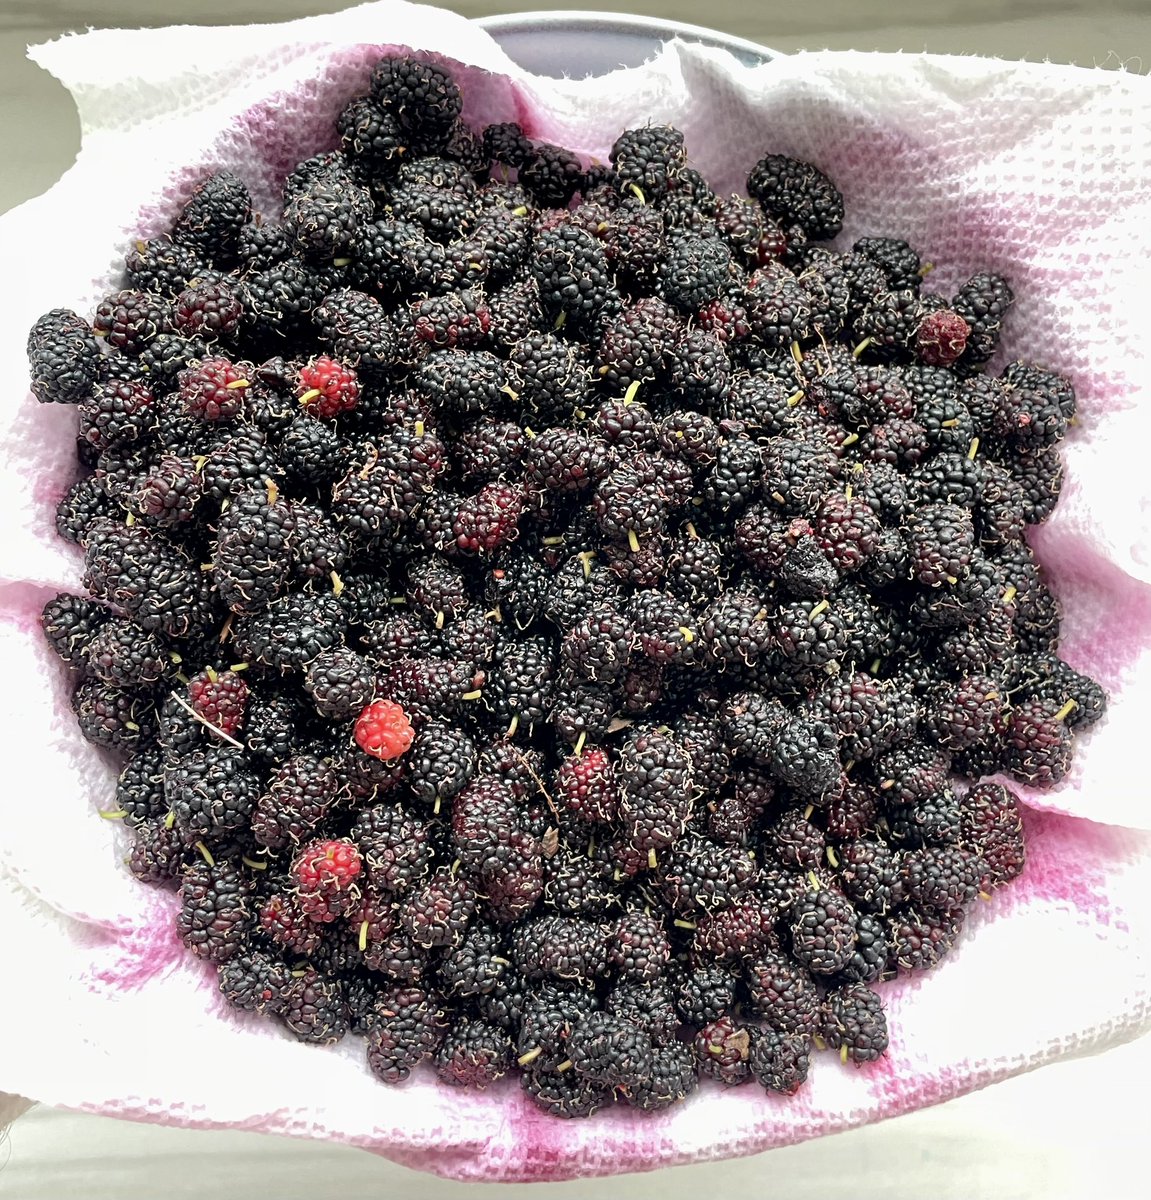 The 🦌 decided to come and feast on my mulberry trees. I don’t recall providing informed consent, but at least they were kind enough to leave some for us 😋